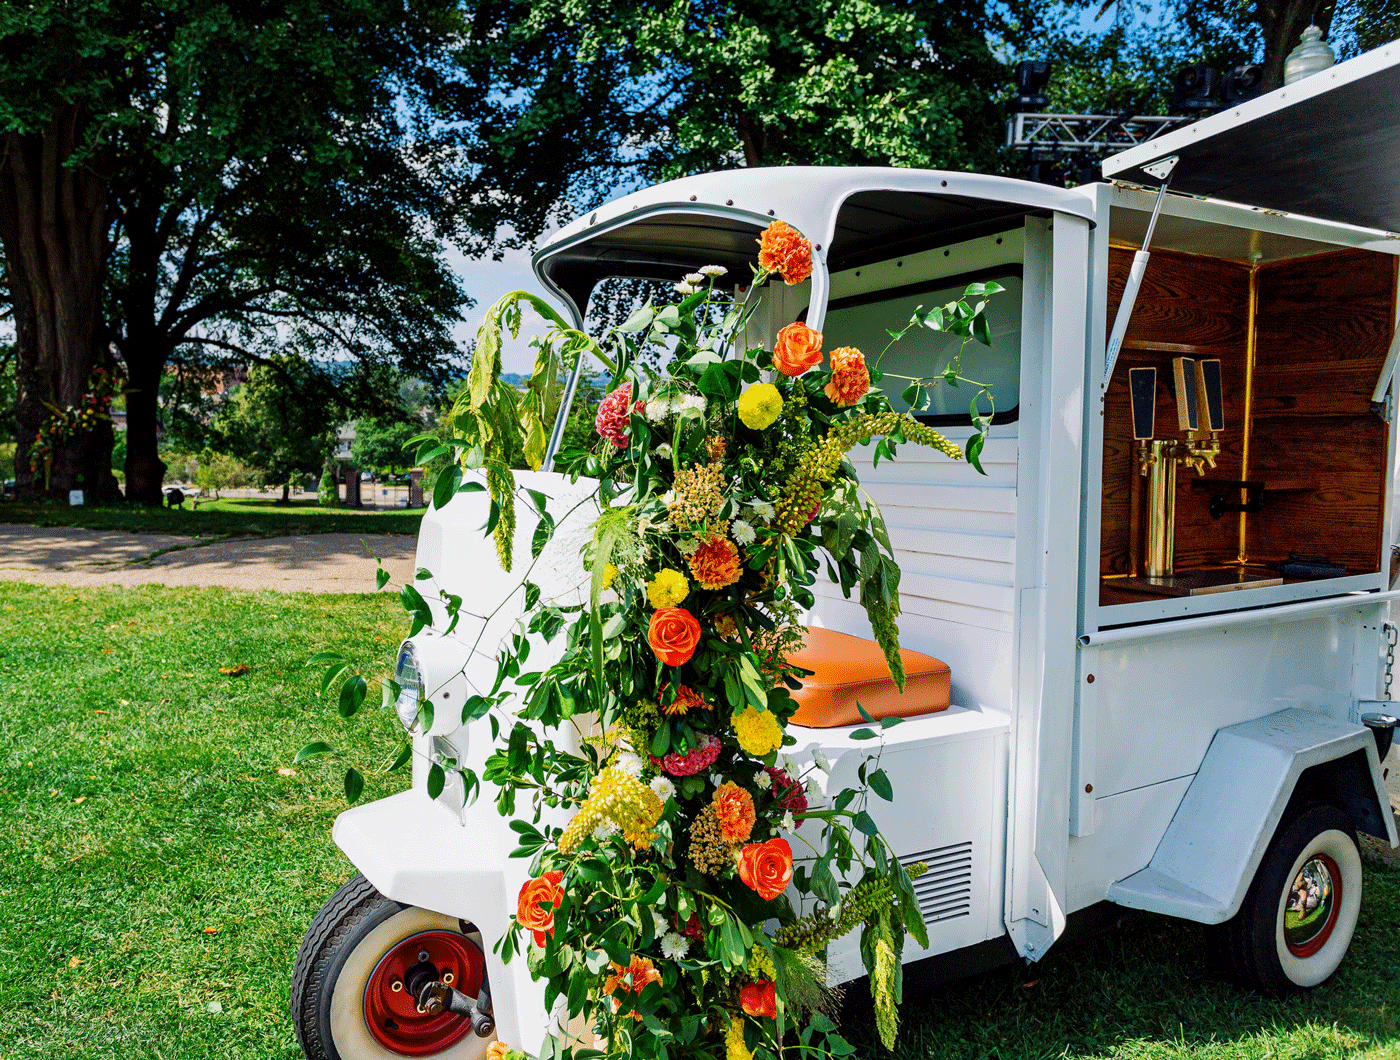 A small vehicle with bar taps in the side is adorned with flowers